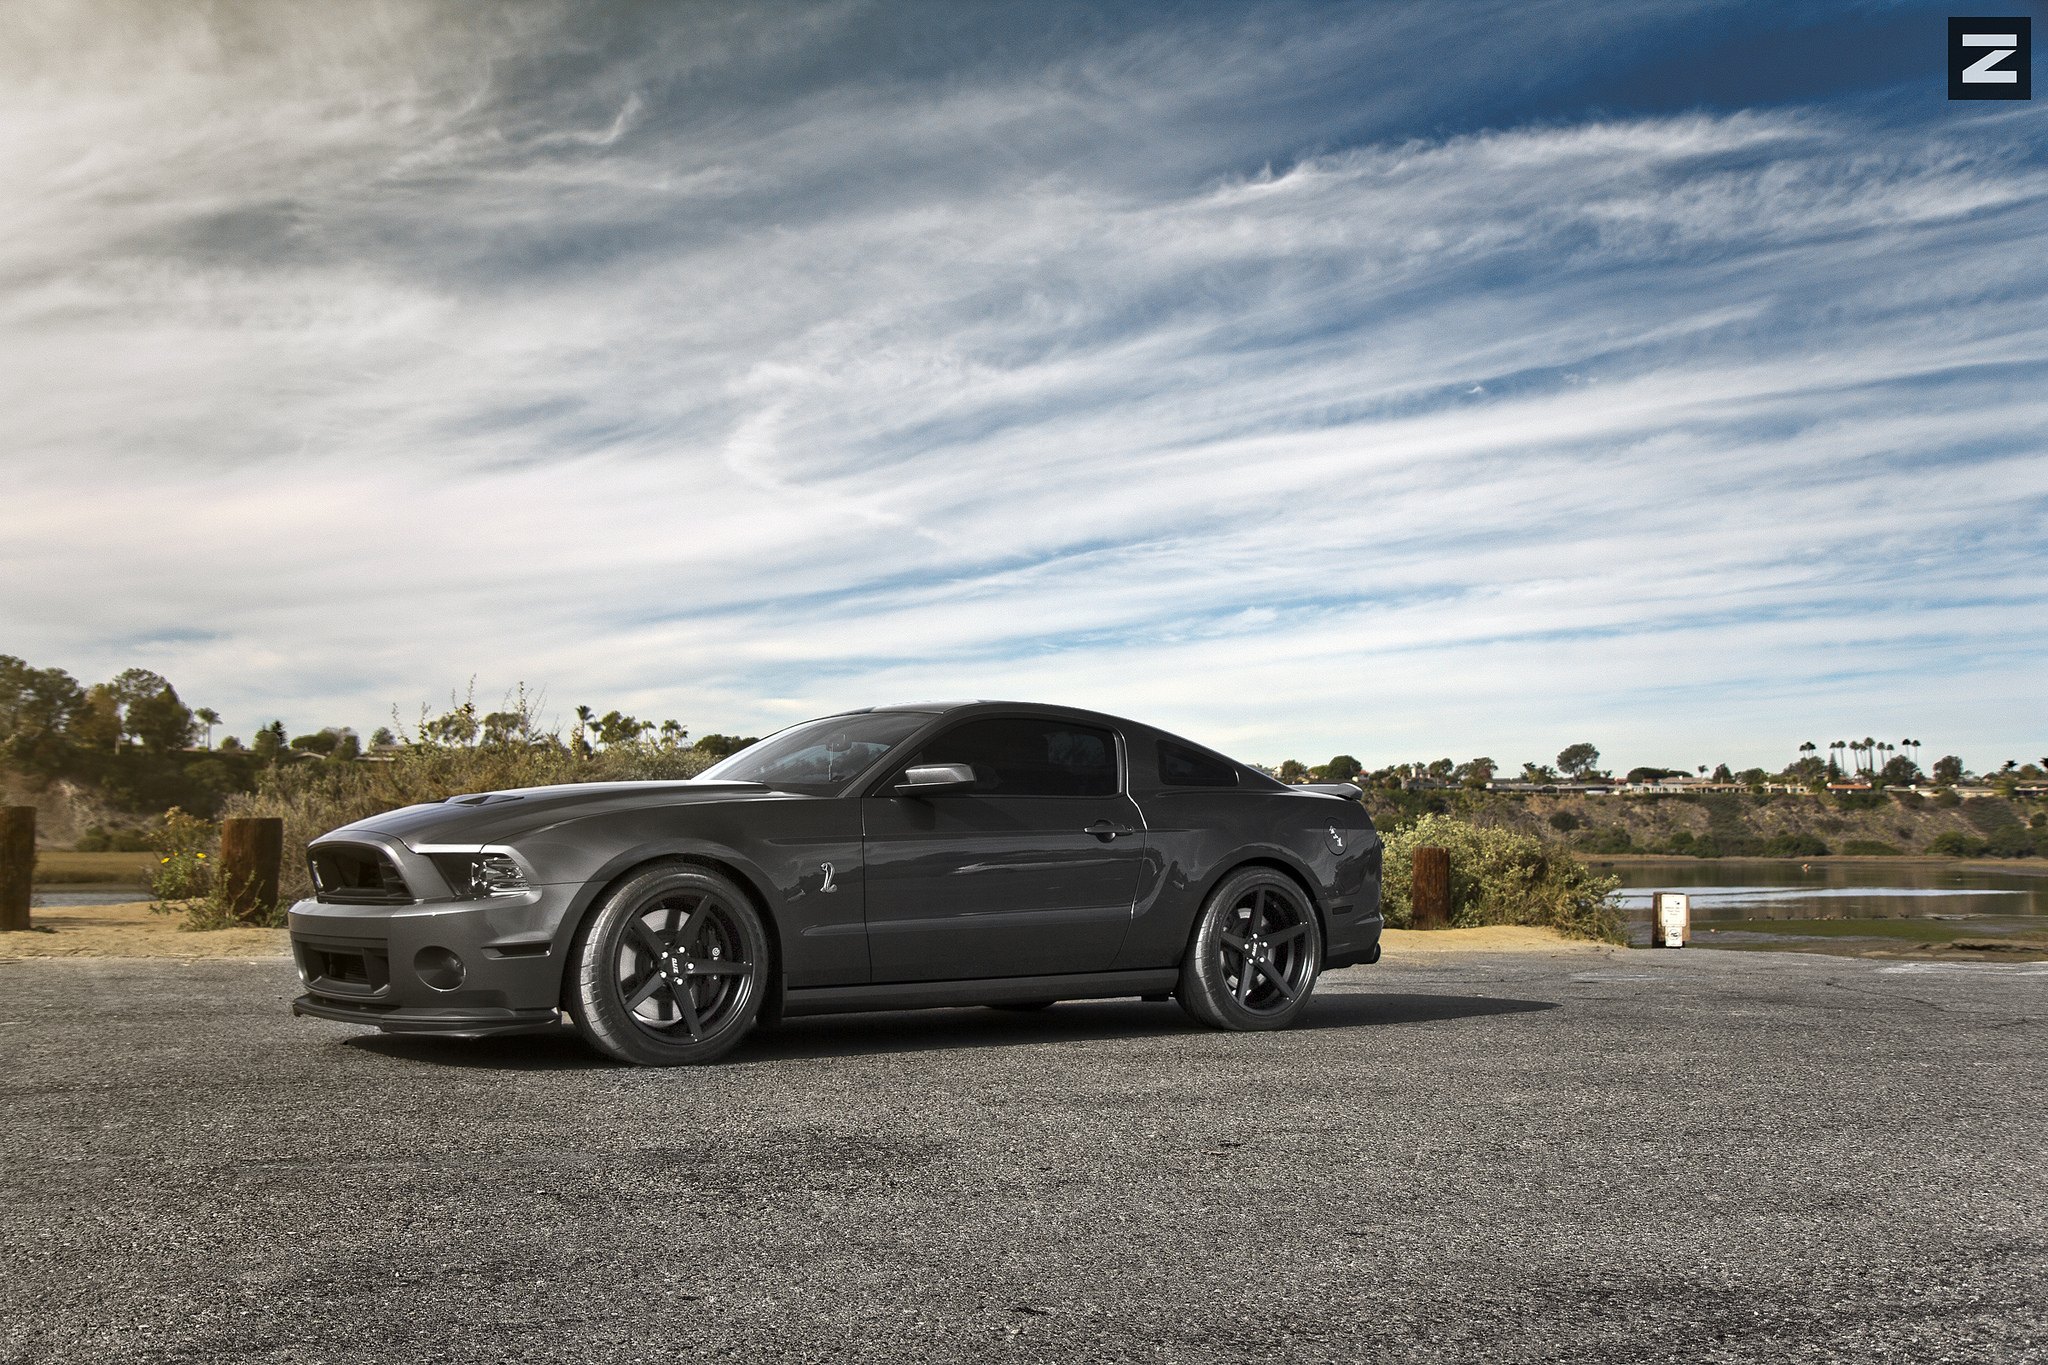 Gray Ford Mustang with Aftermarket Headlights - Photo by Zito Wheels